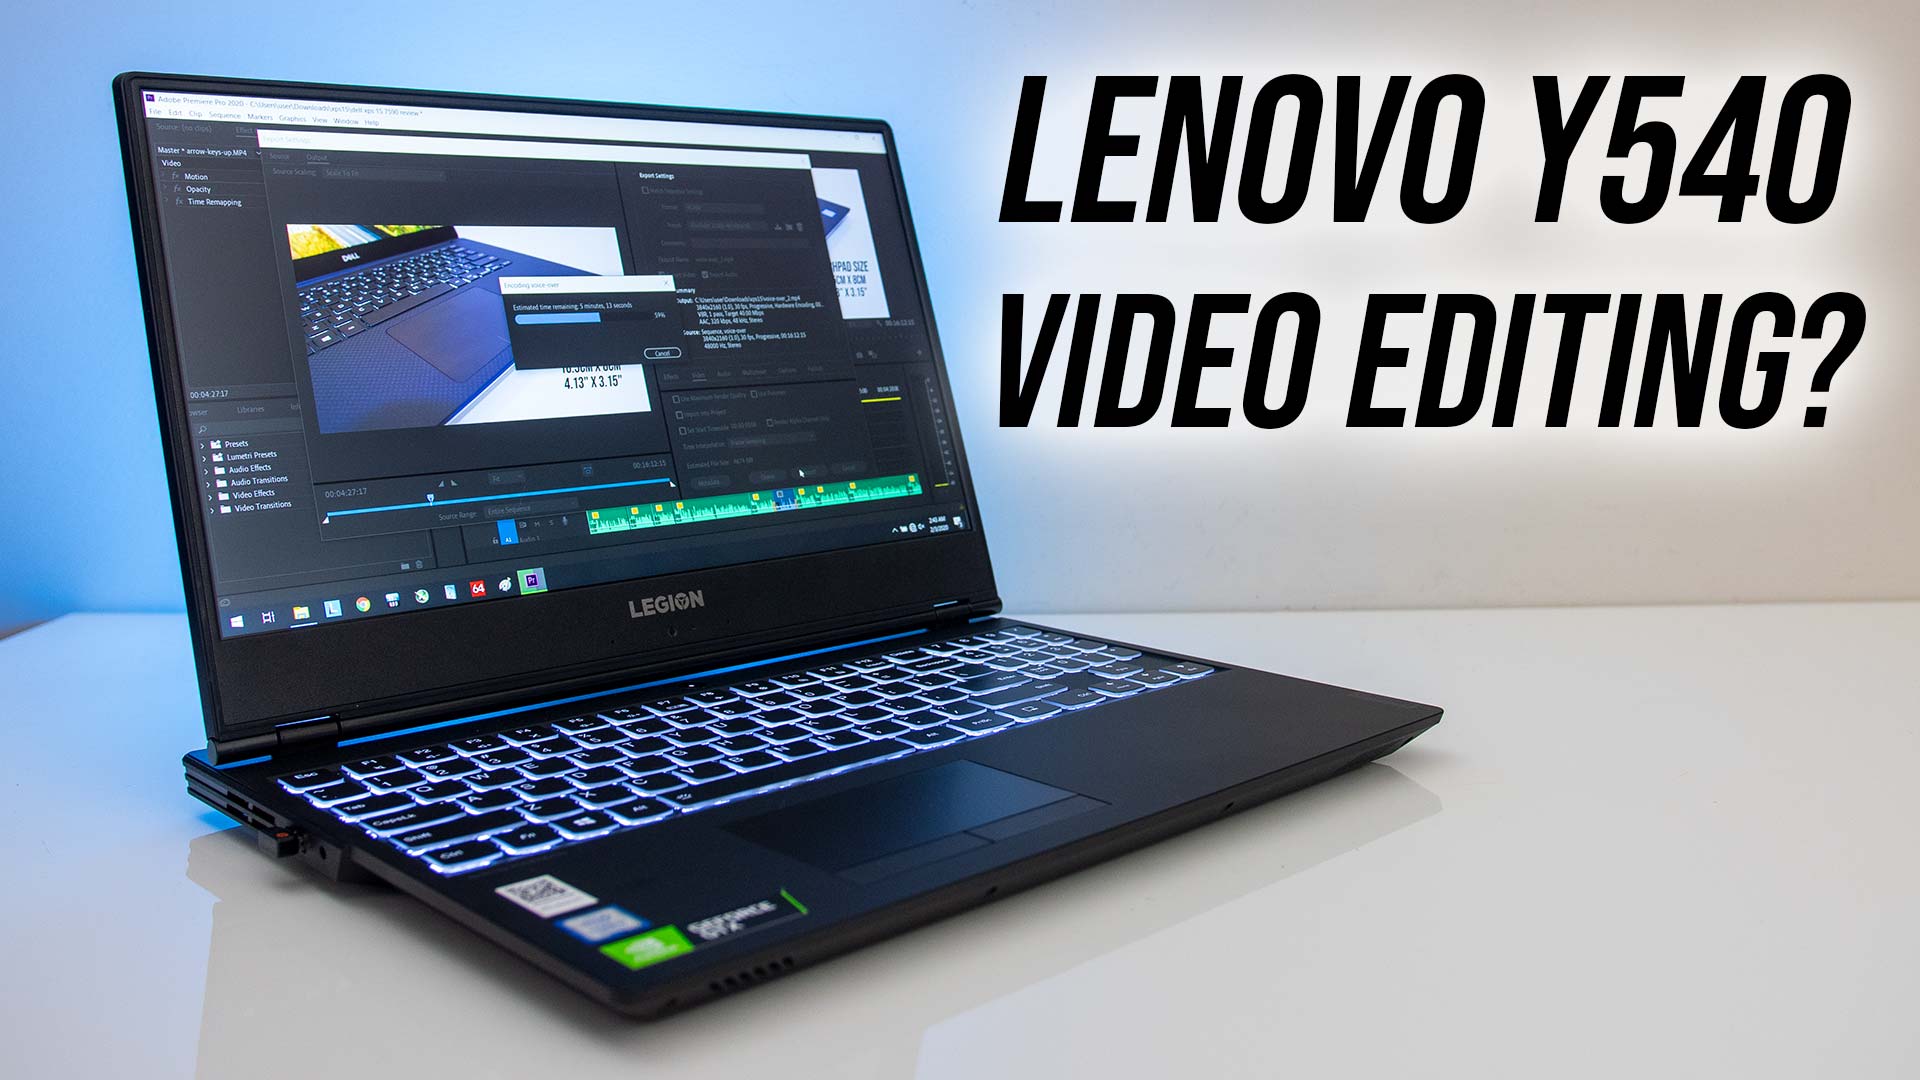 invideo - Tag that video editor friend you're thinking of, and say